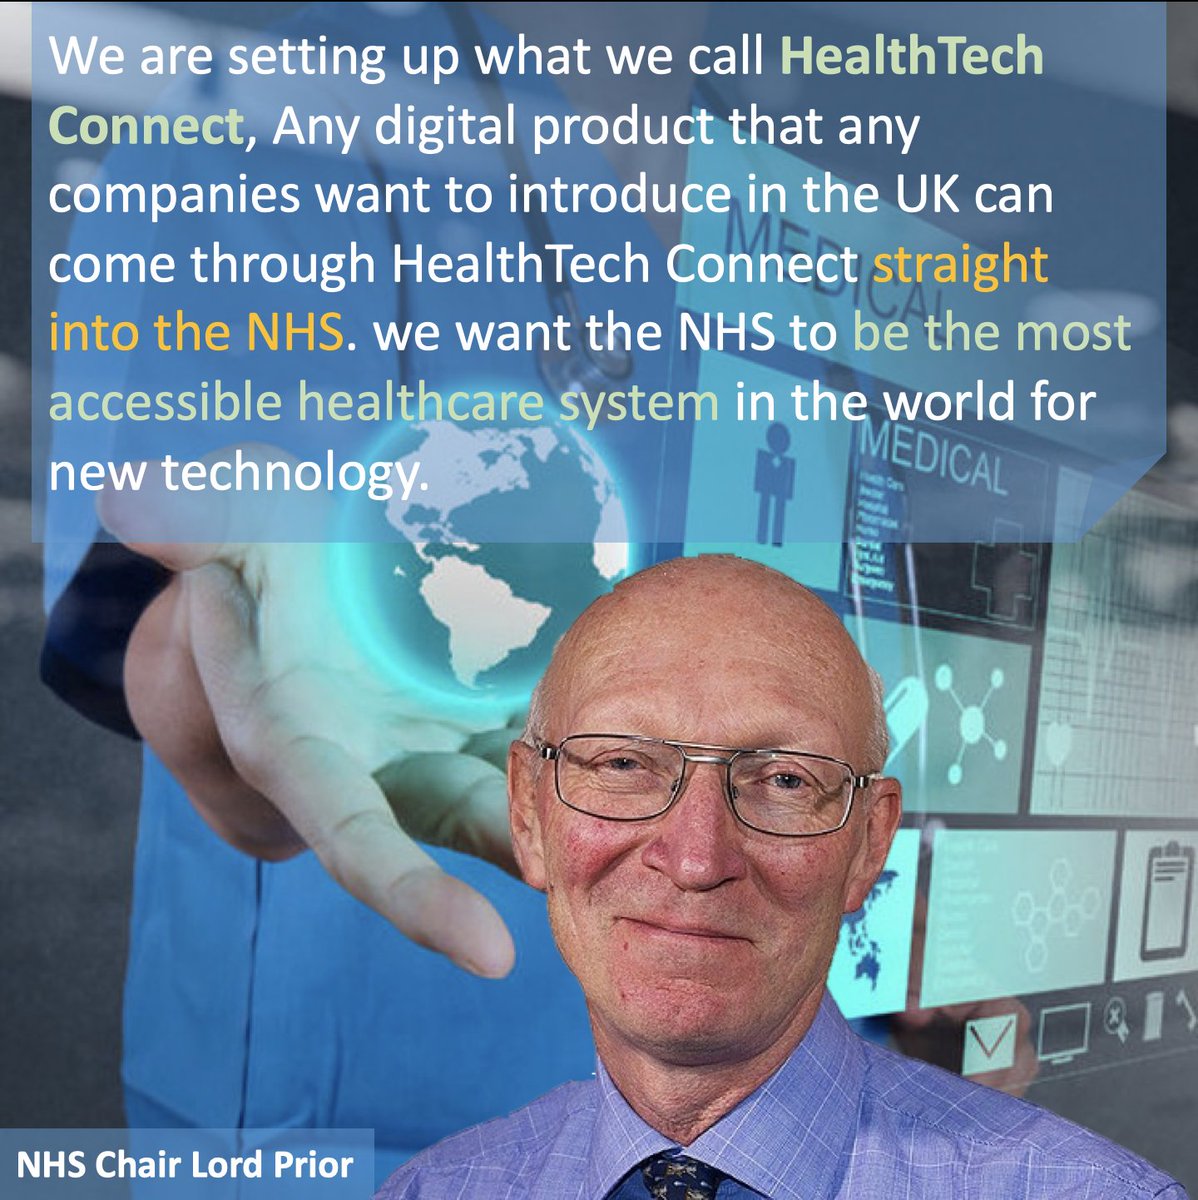 #NHS chair Lord Prior announced that part of the NHS's new 10-year plan is to make the organisation a testbed for new #health tech, such as the portal-like HealthTechConnect. mobihealthnews.com/content/nhs-ch…
#digitalhealth #mHealth #eHealth #healthcare #MEDTECH #patients